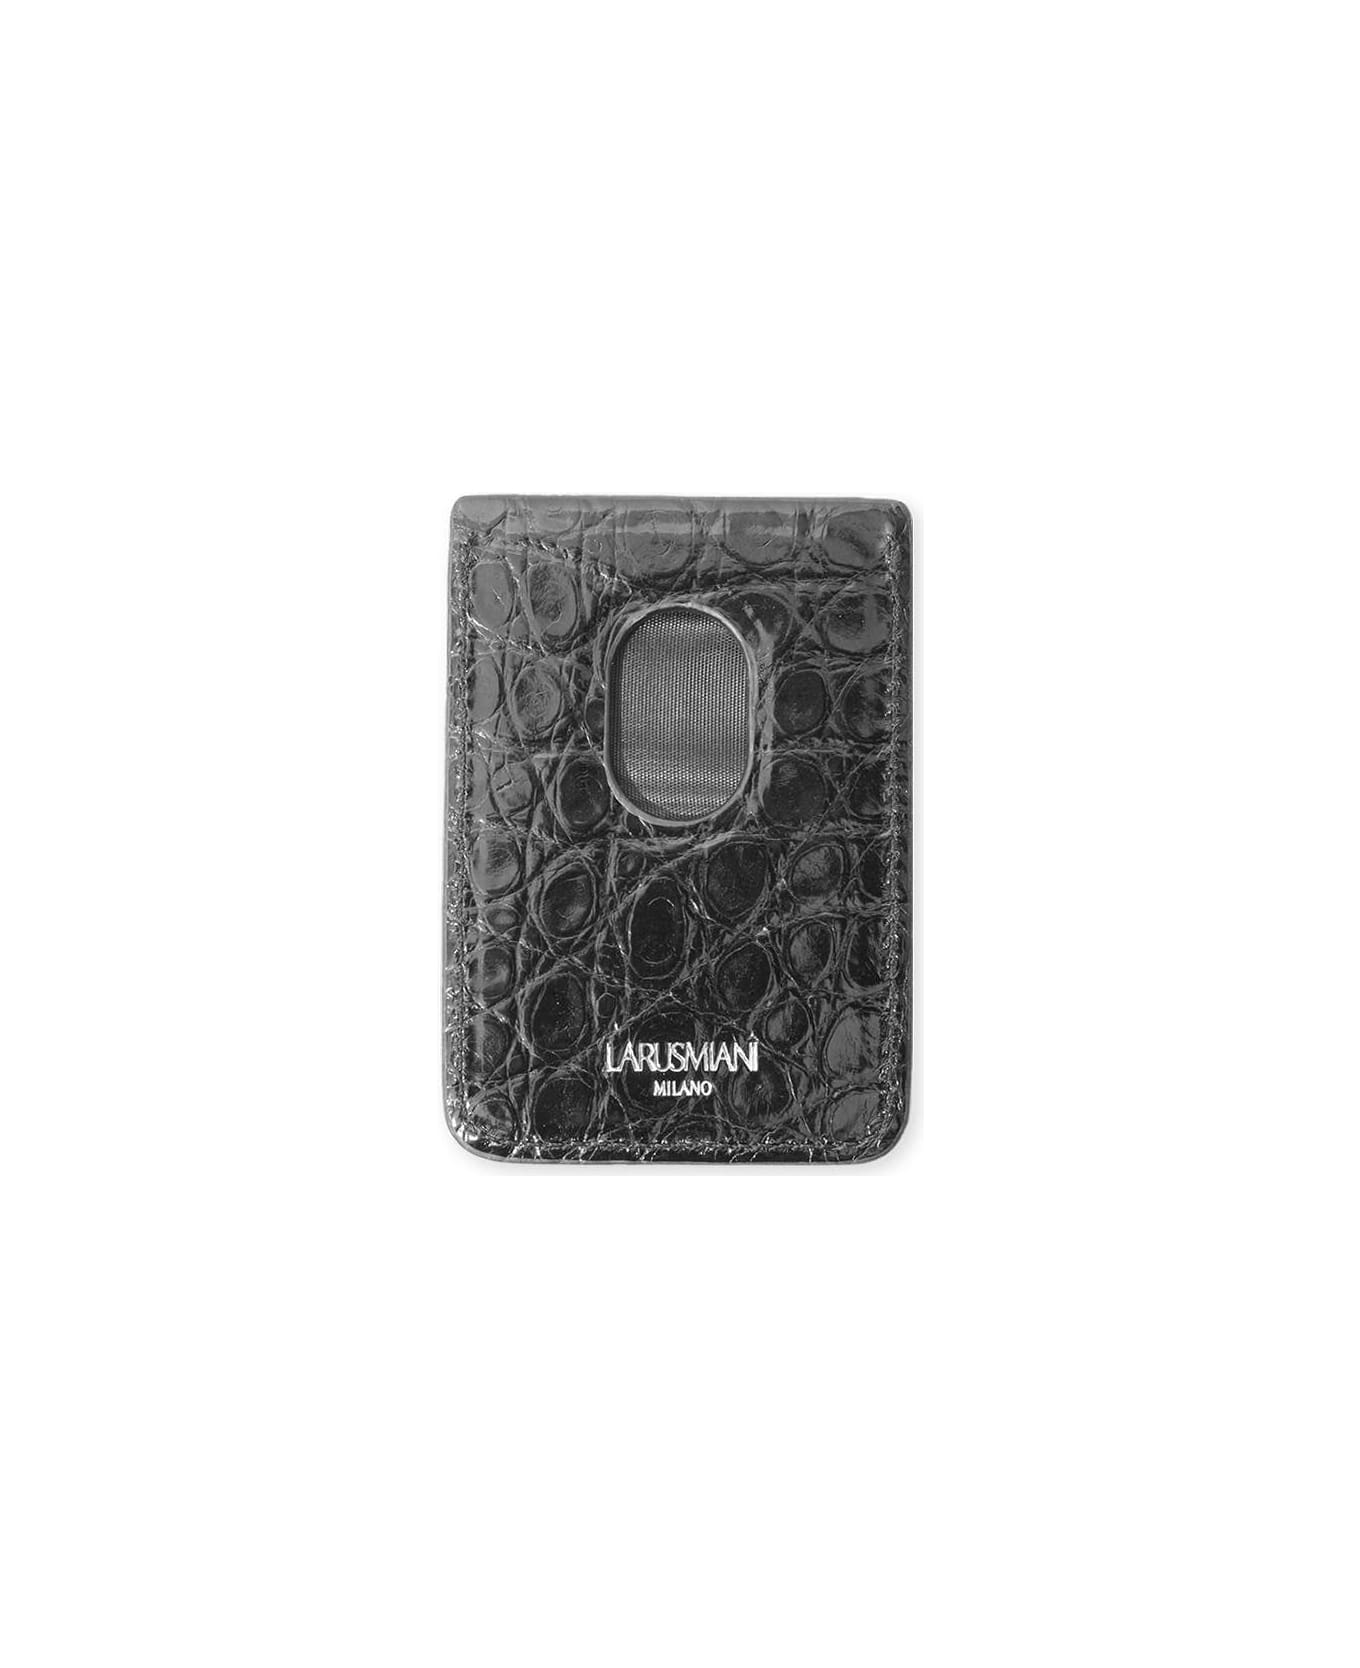 Larusmiani Magnetic Credit Card Holder For Iphone Accessory - Black